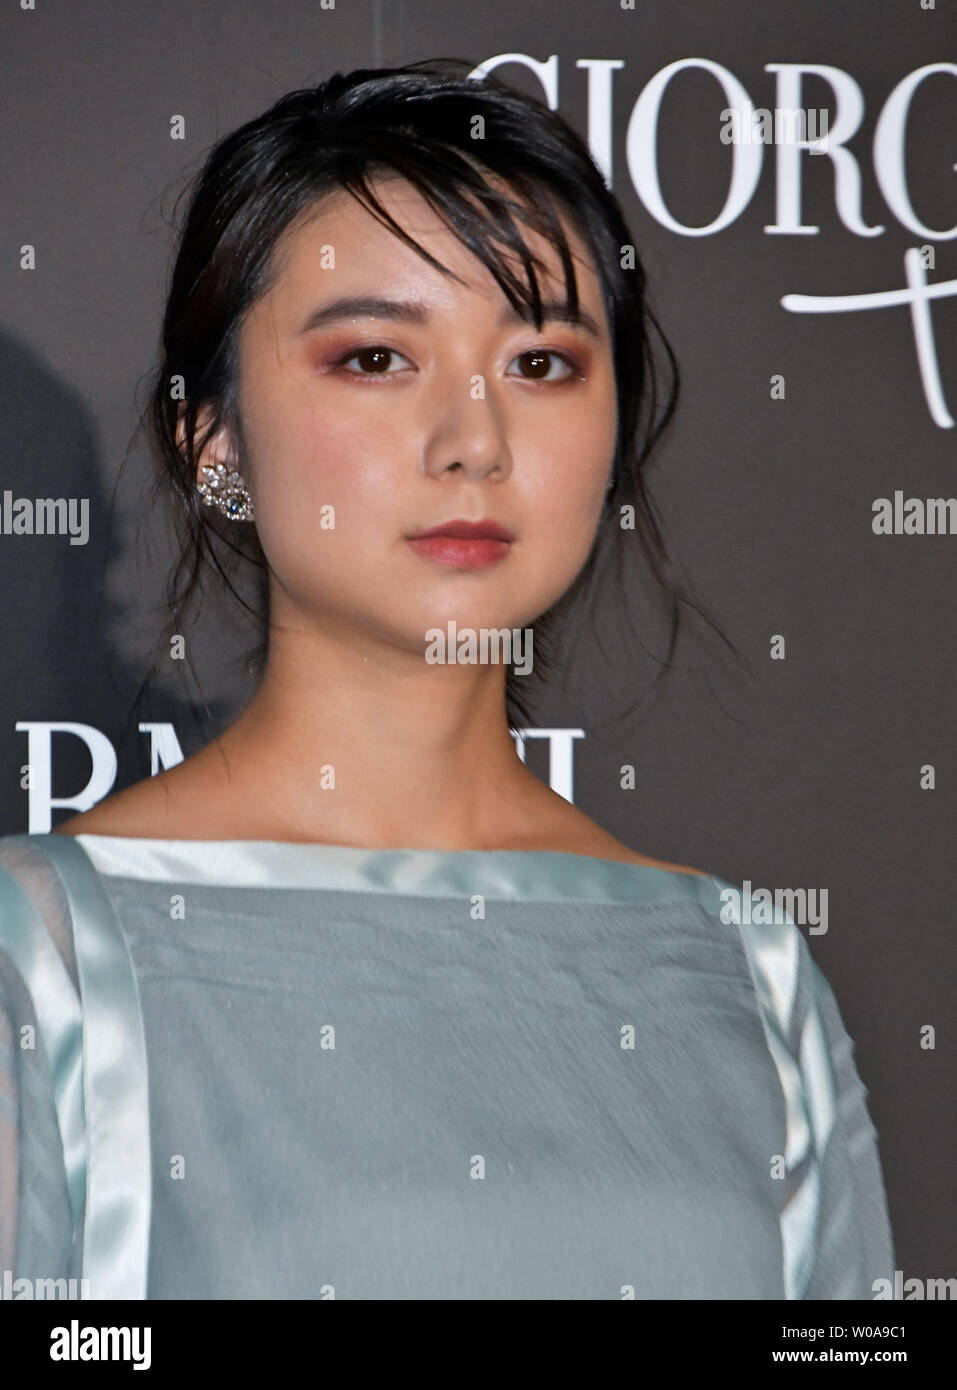 Japanese Actress Mone Kamishiraishi Attends The Photocall For Giorgio